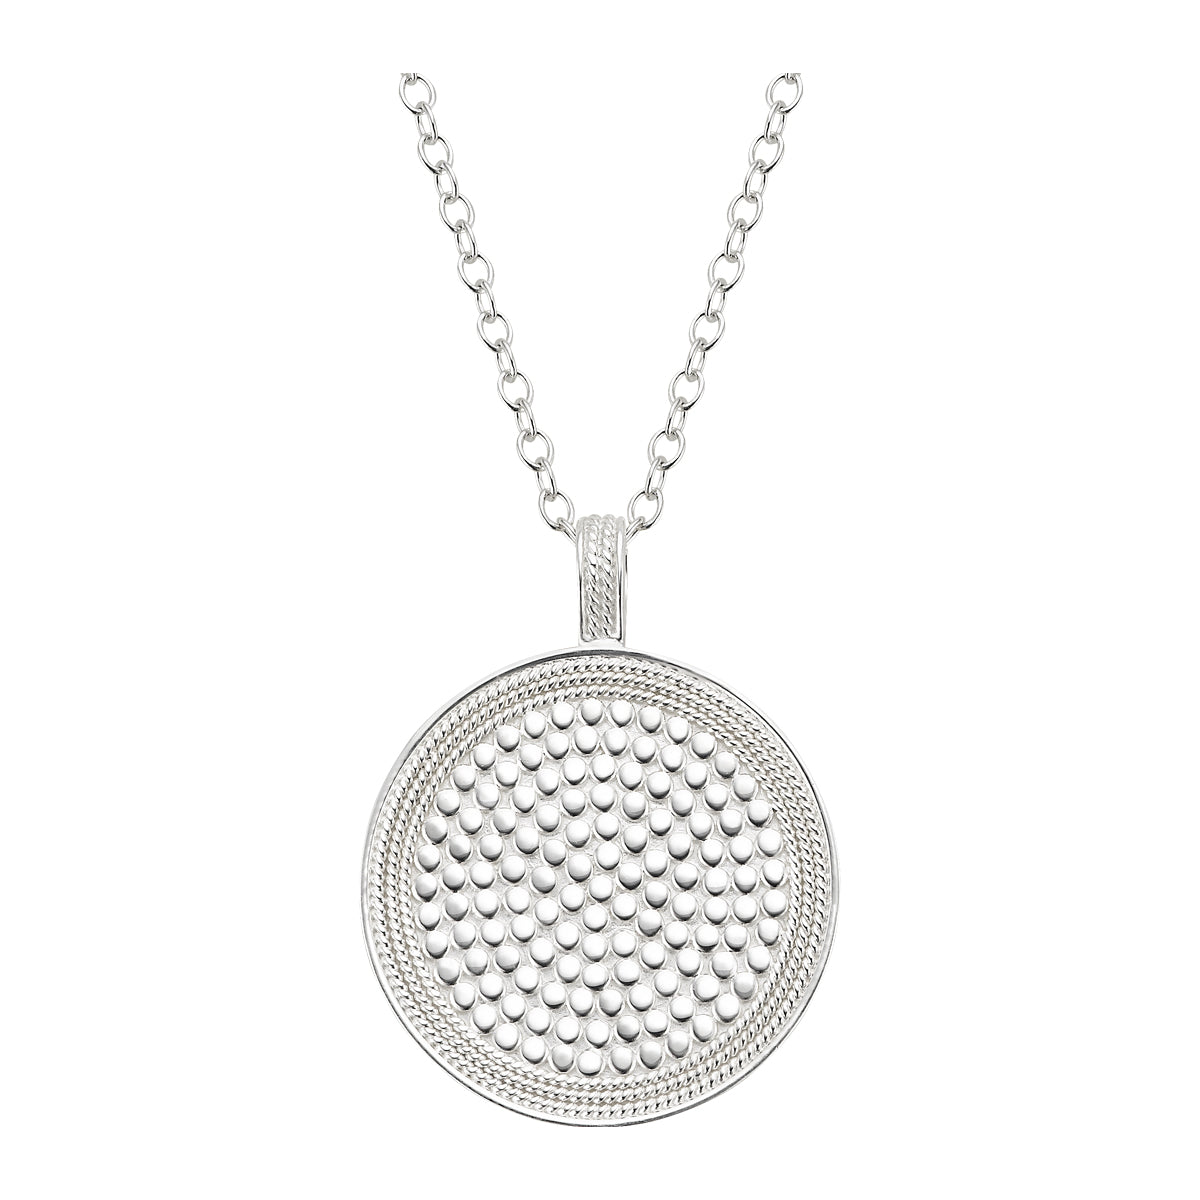 Long pendant necklace in sterling silver with 18K gold dot work